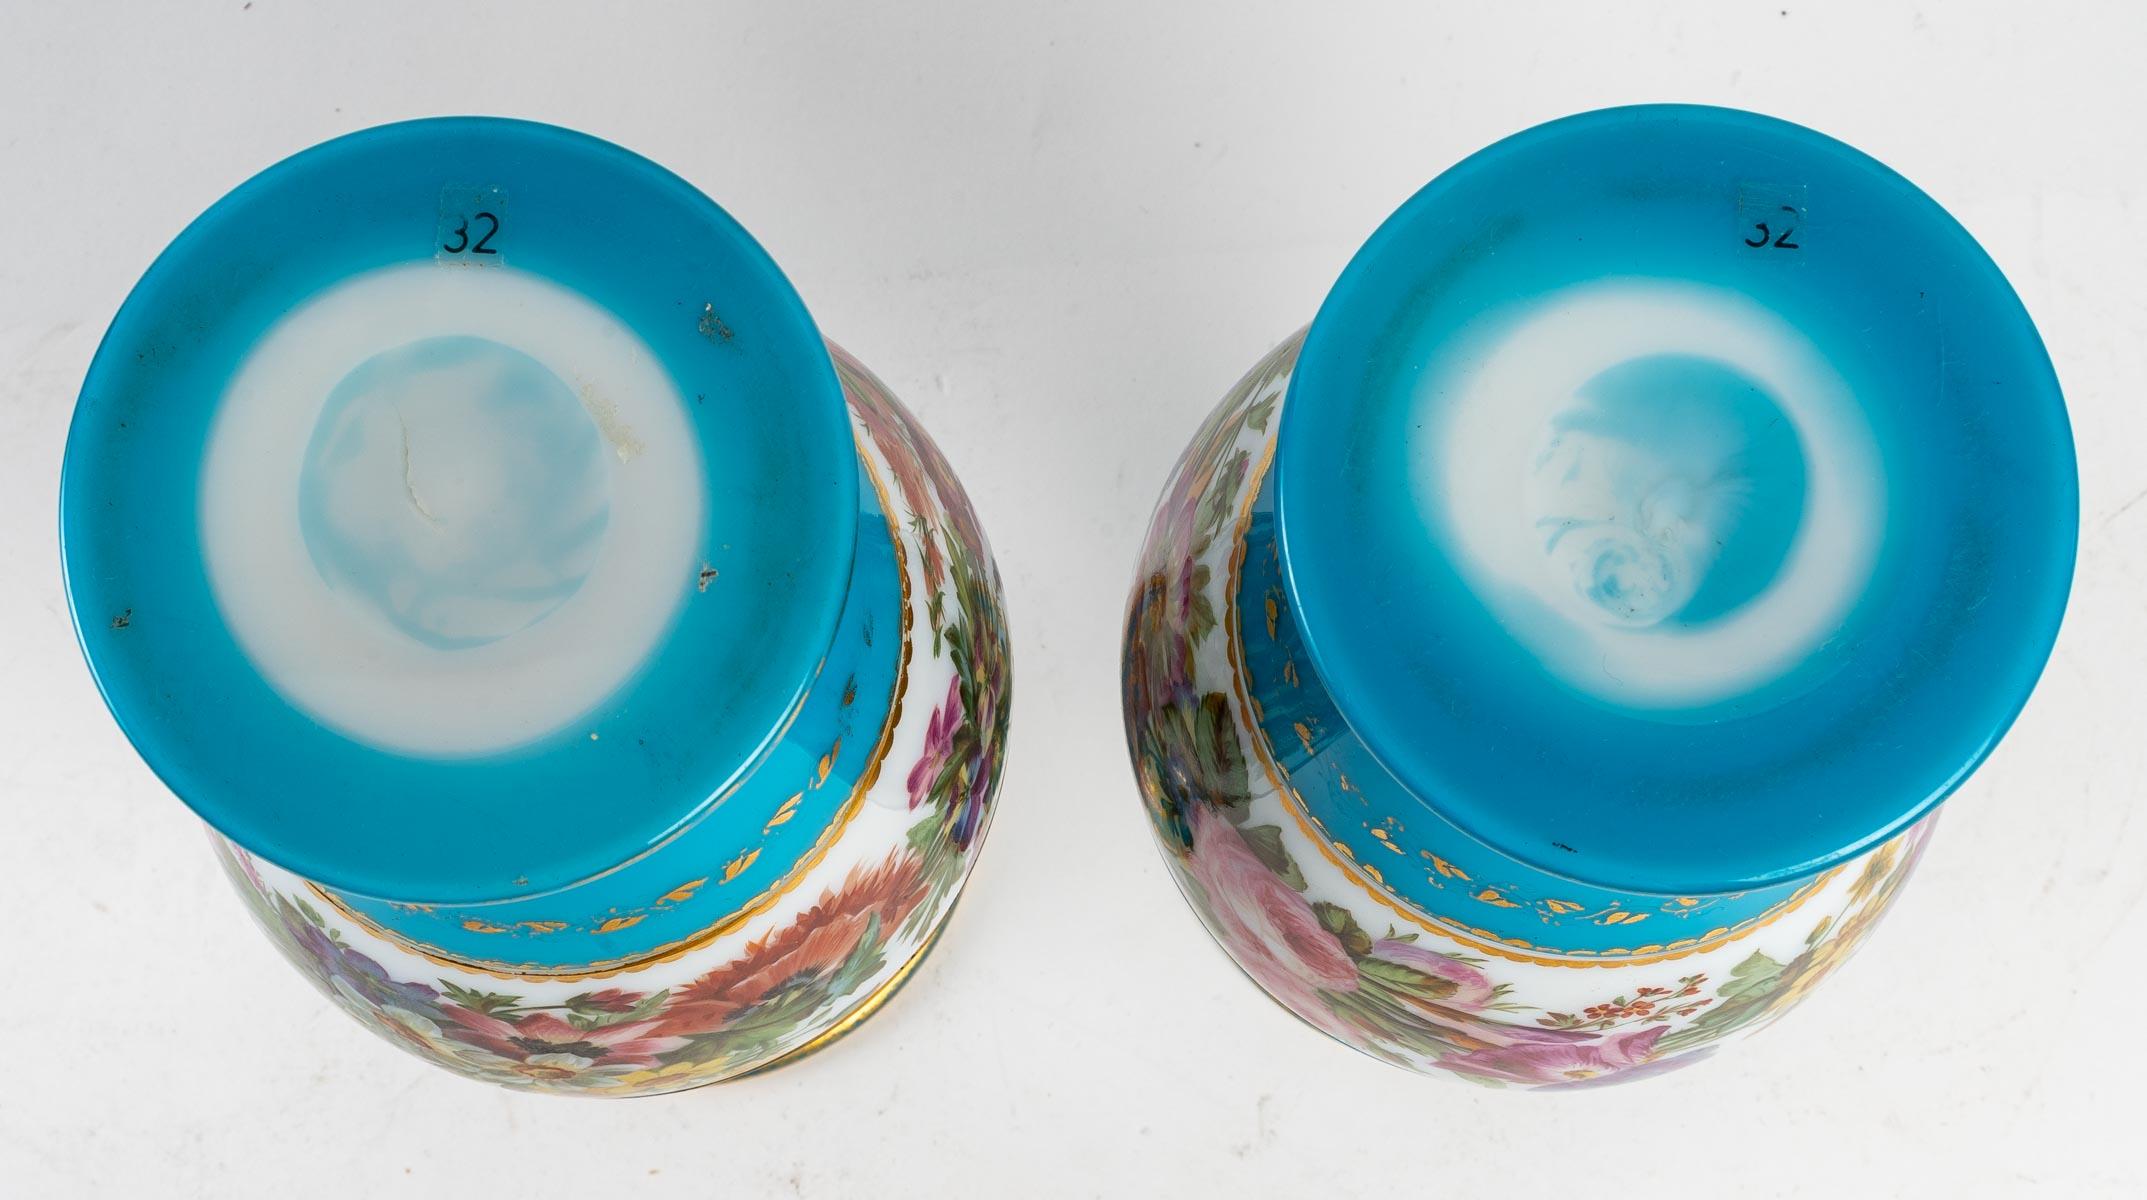 A pair of Baccarat opaline vases, white and turquoise overlay, flower scenes, circa 1840-1860.
Measures: H: 29.5 cm, D: 15 cm.